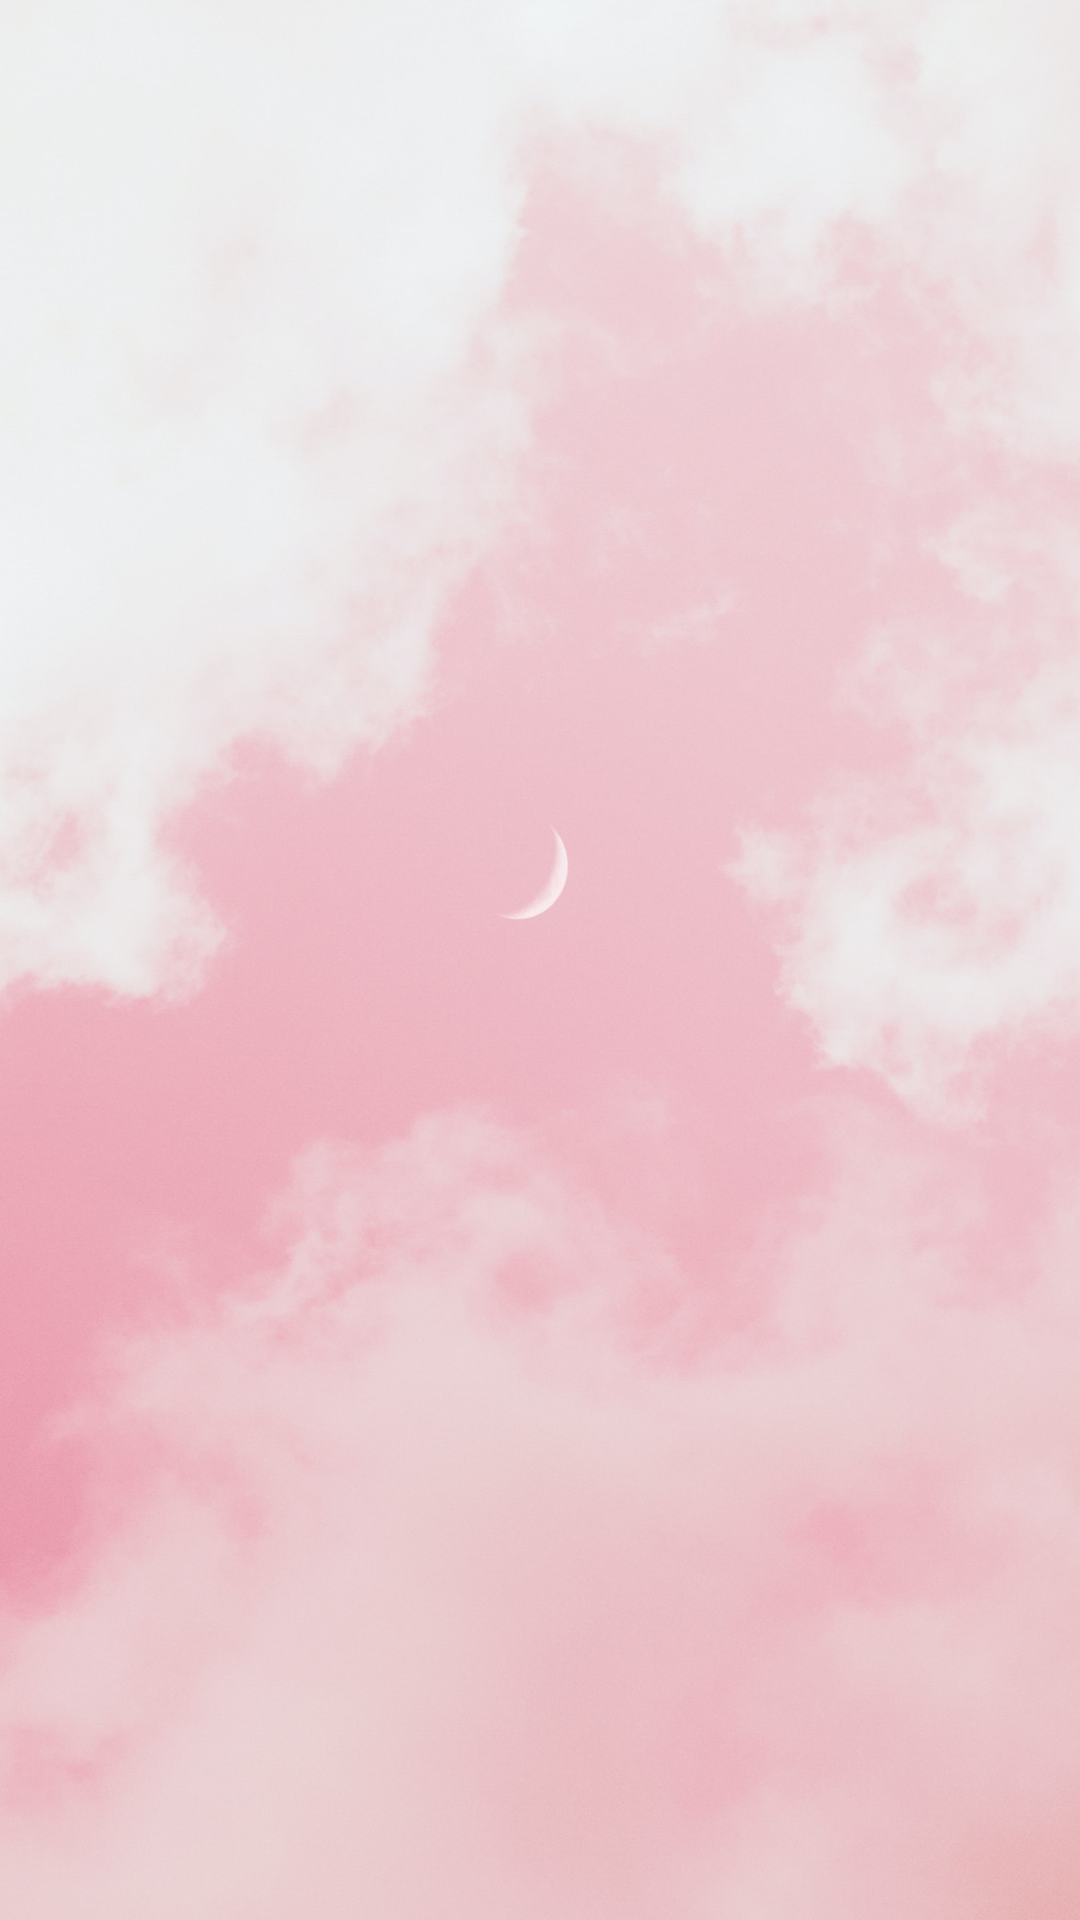 Pink Aesthetic iPhone Wallpaper for Women and Girls Violet Journal